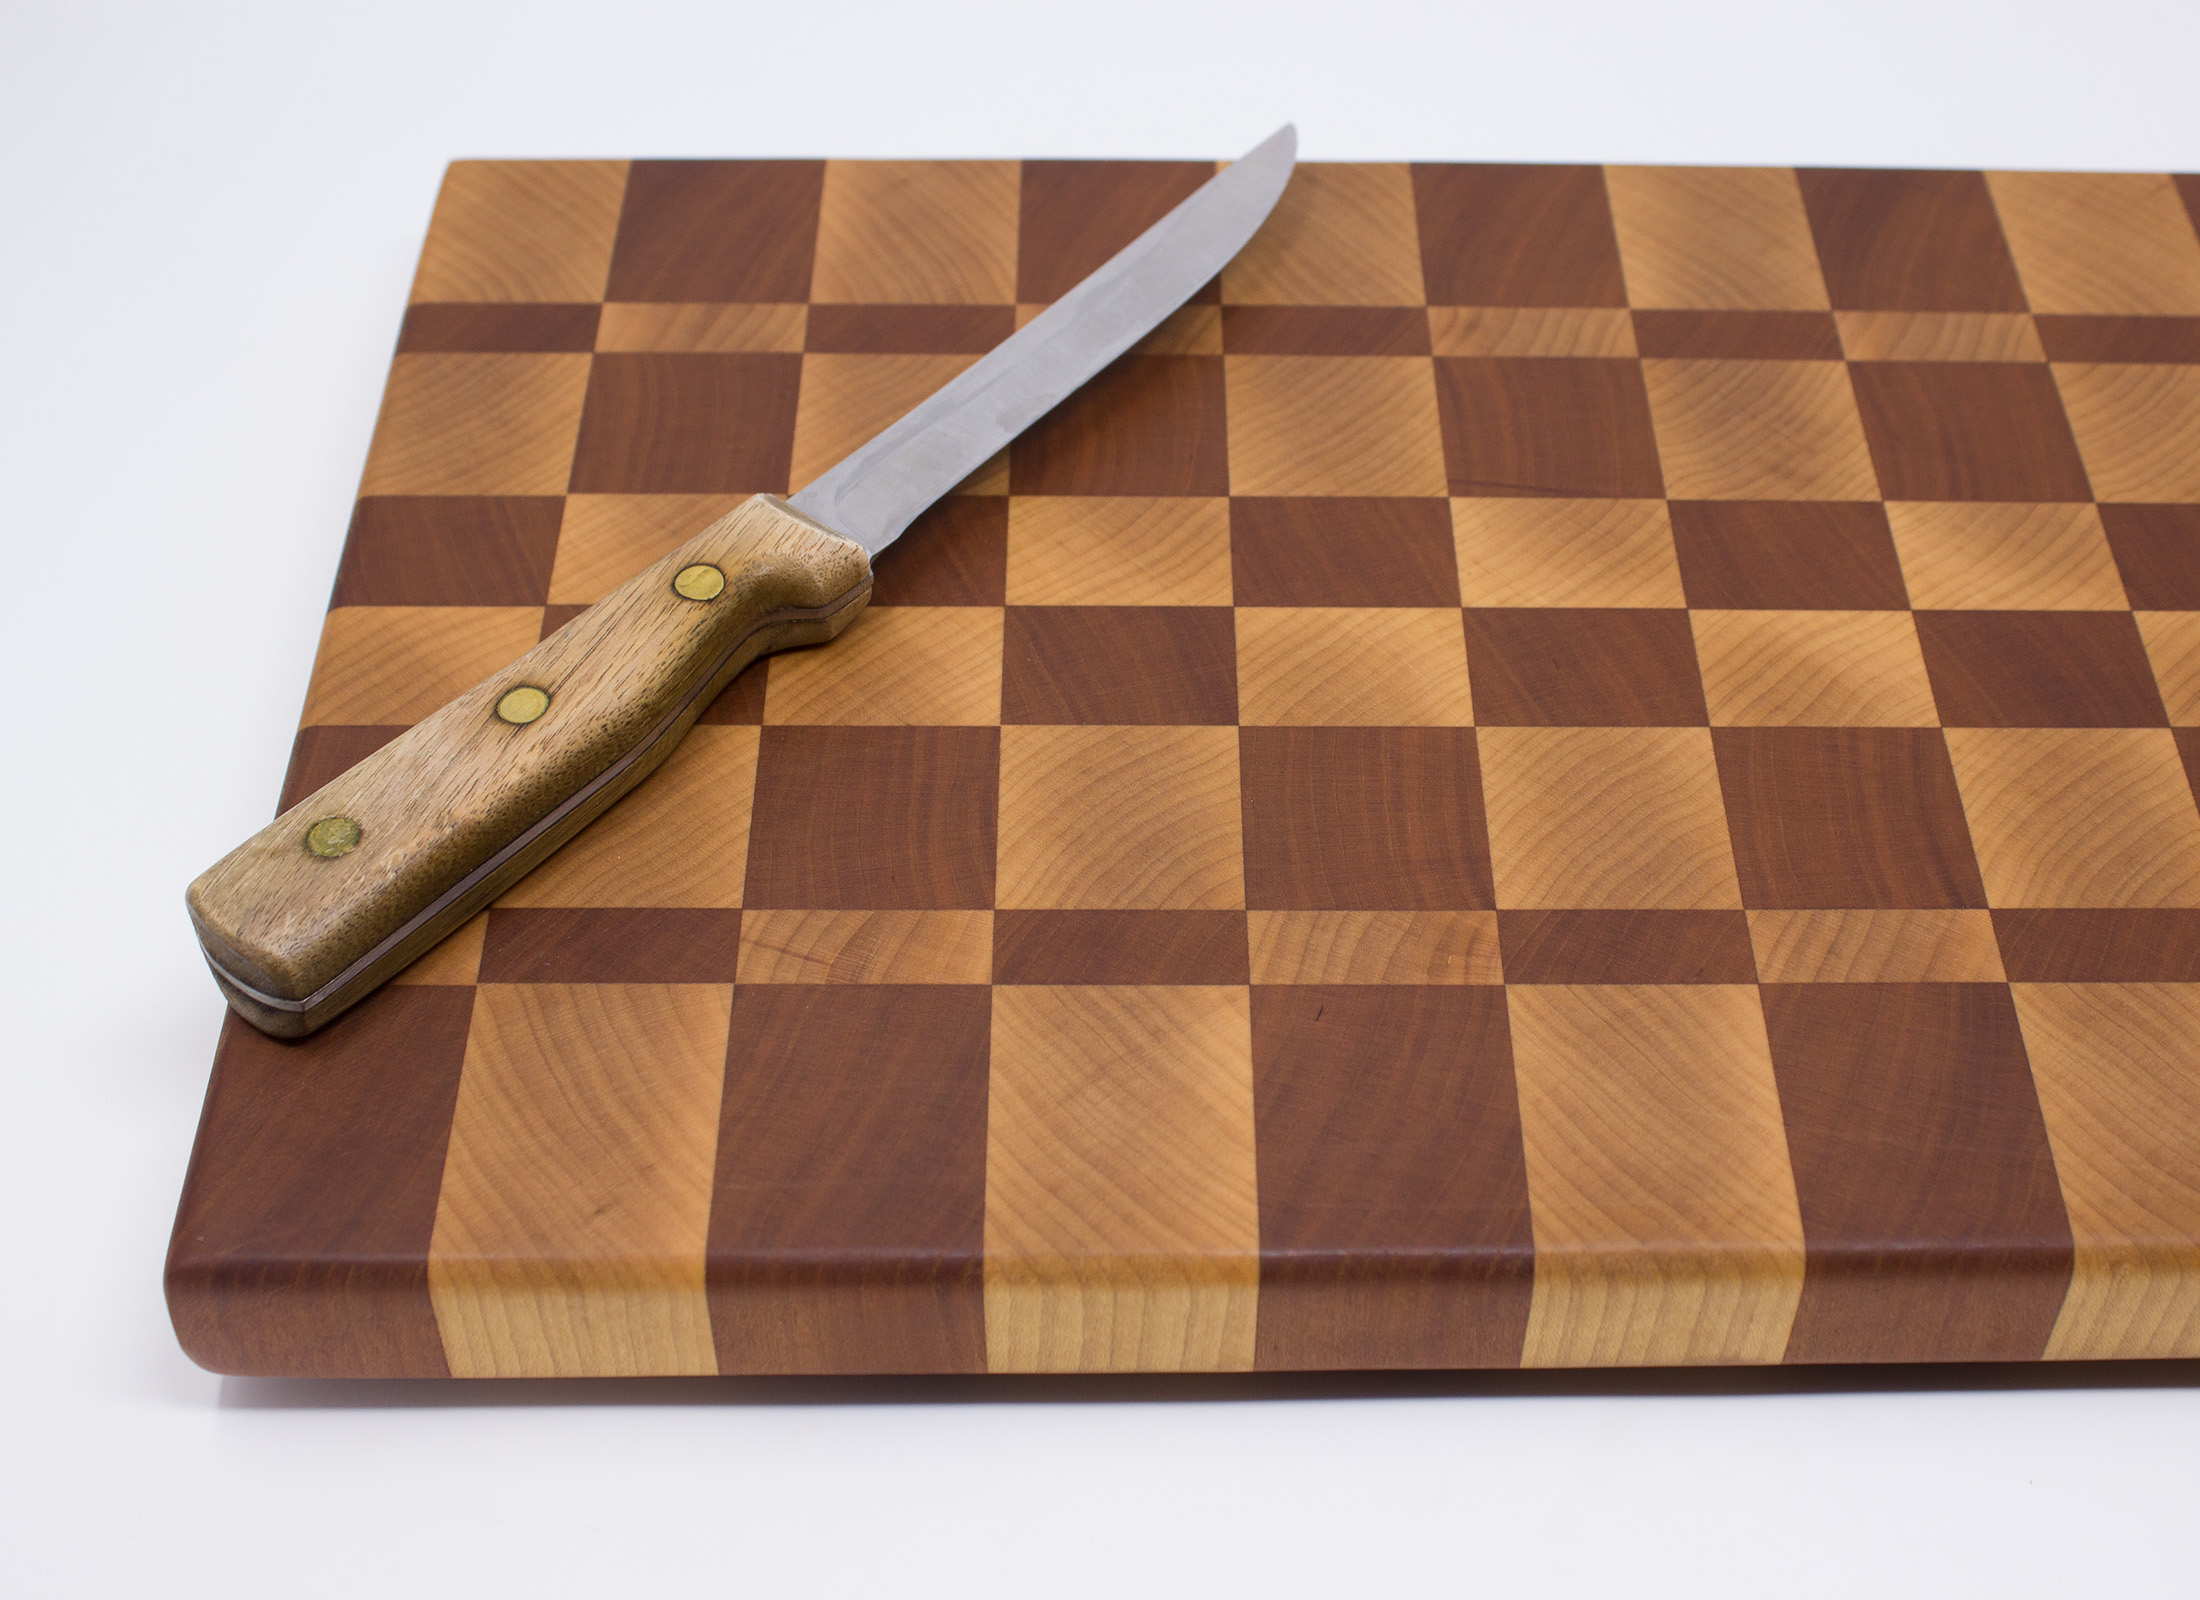 https://www.rockfordwoodcrafts.com/wp-content/uploads/Maple-and-Cherry-Checkerboard-End-Grain-Cutting-Board-Top-with-Knife.jpg